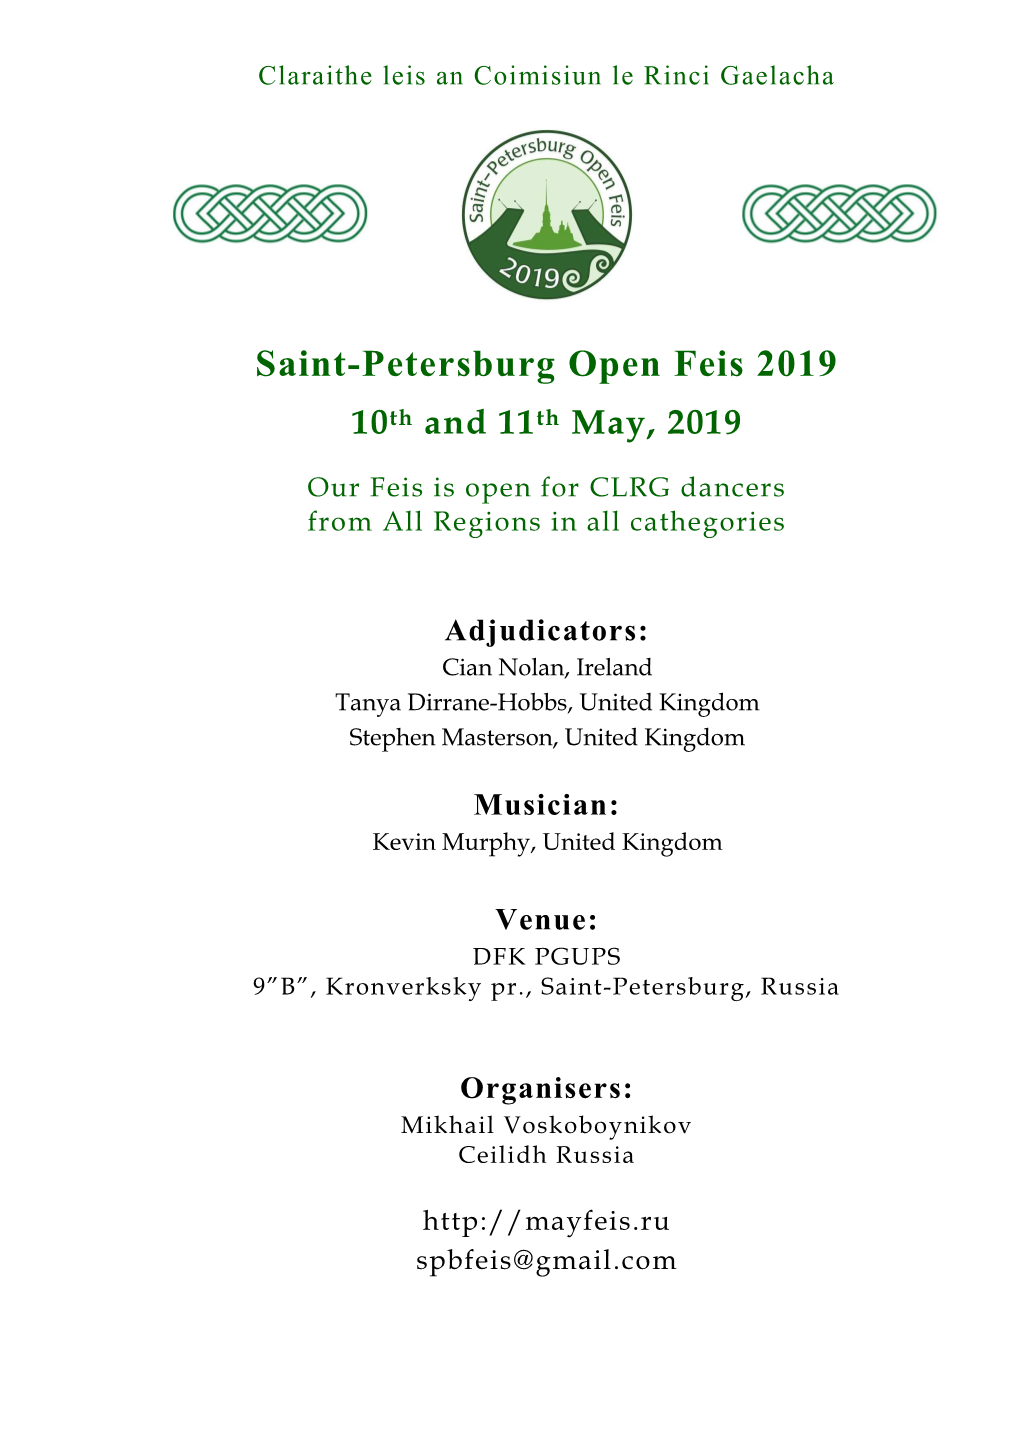 Saint-Petersburg Open Feis 2019 10 Th and 11 Th May, 2019